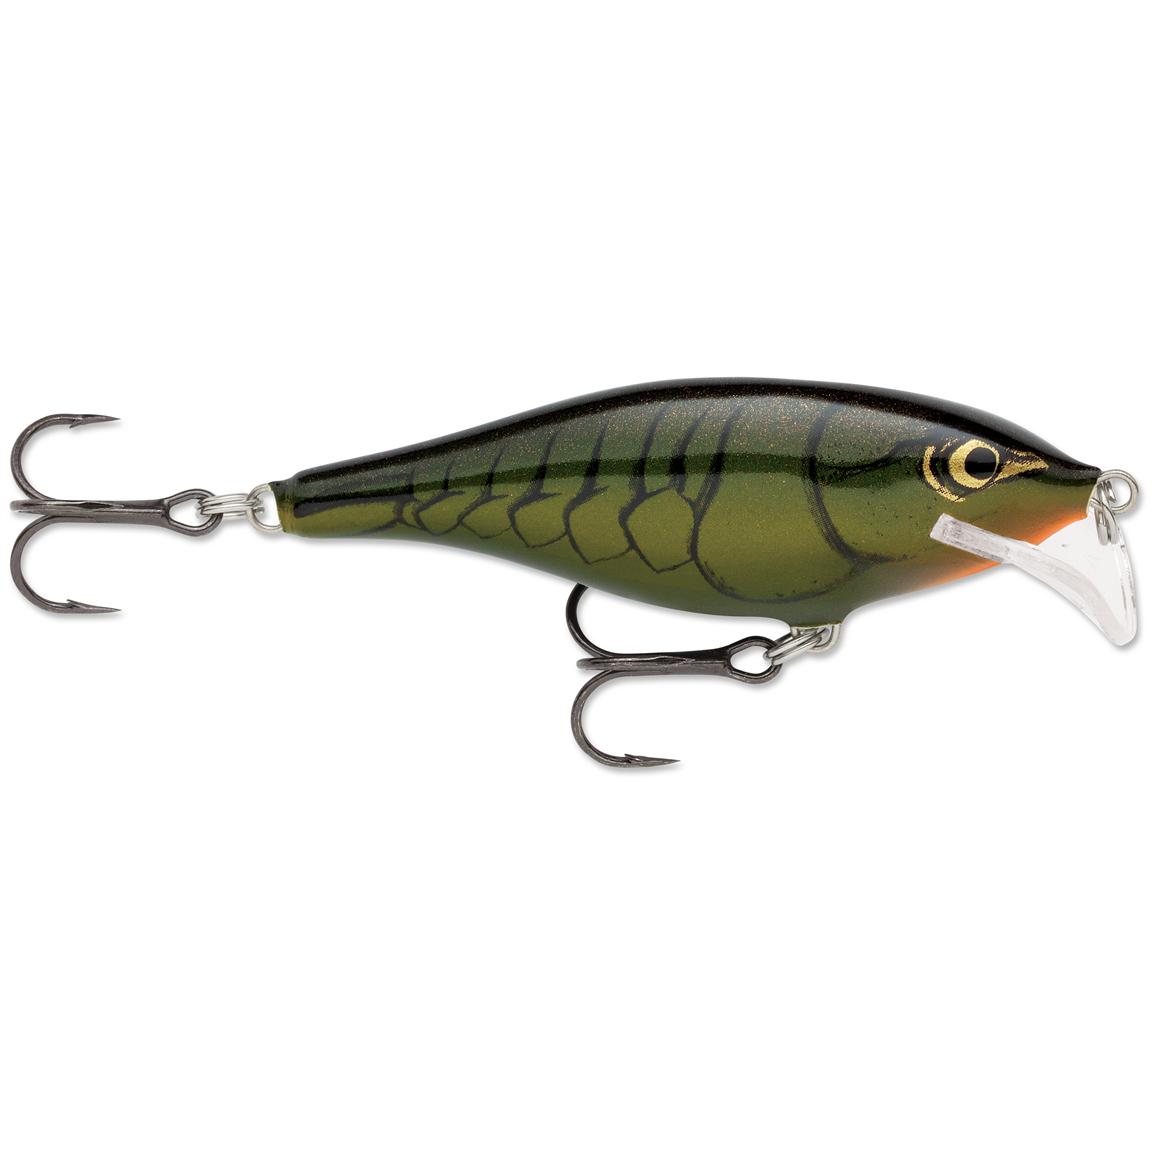 Rapala Scatter Rap Shad Lure #07 - 292874, Crank Baits at Sportsman's Guide